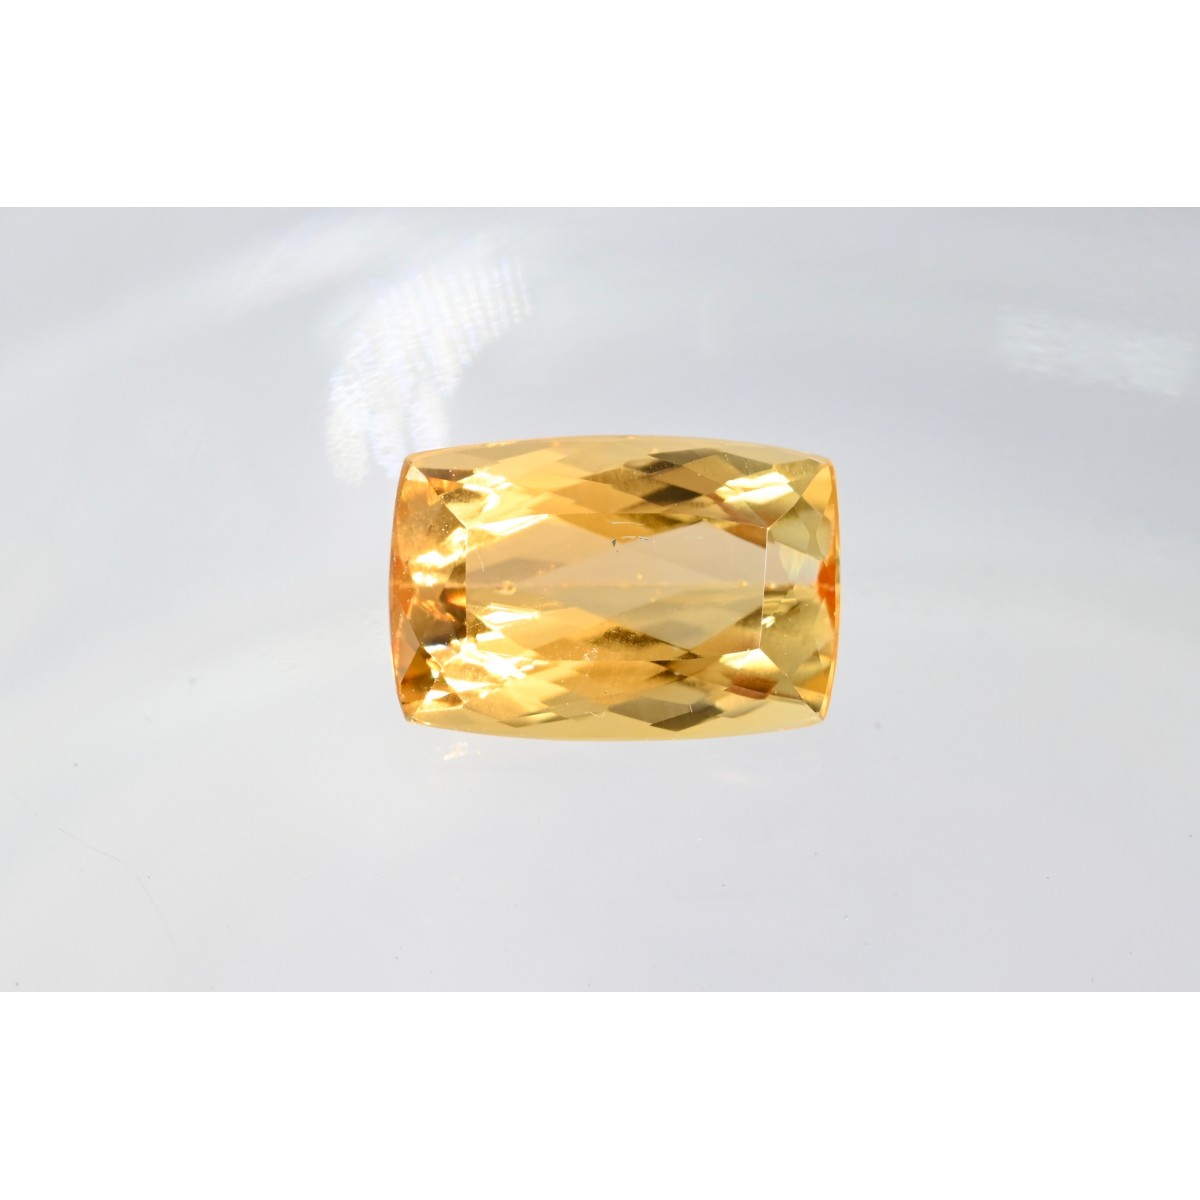 Real Brazilian imperial 3.33 ct.